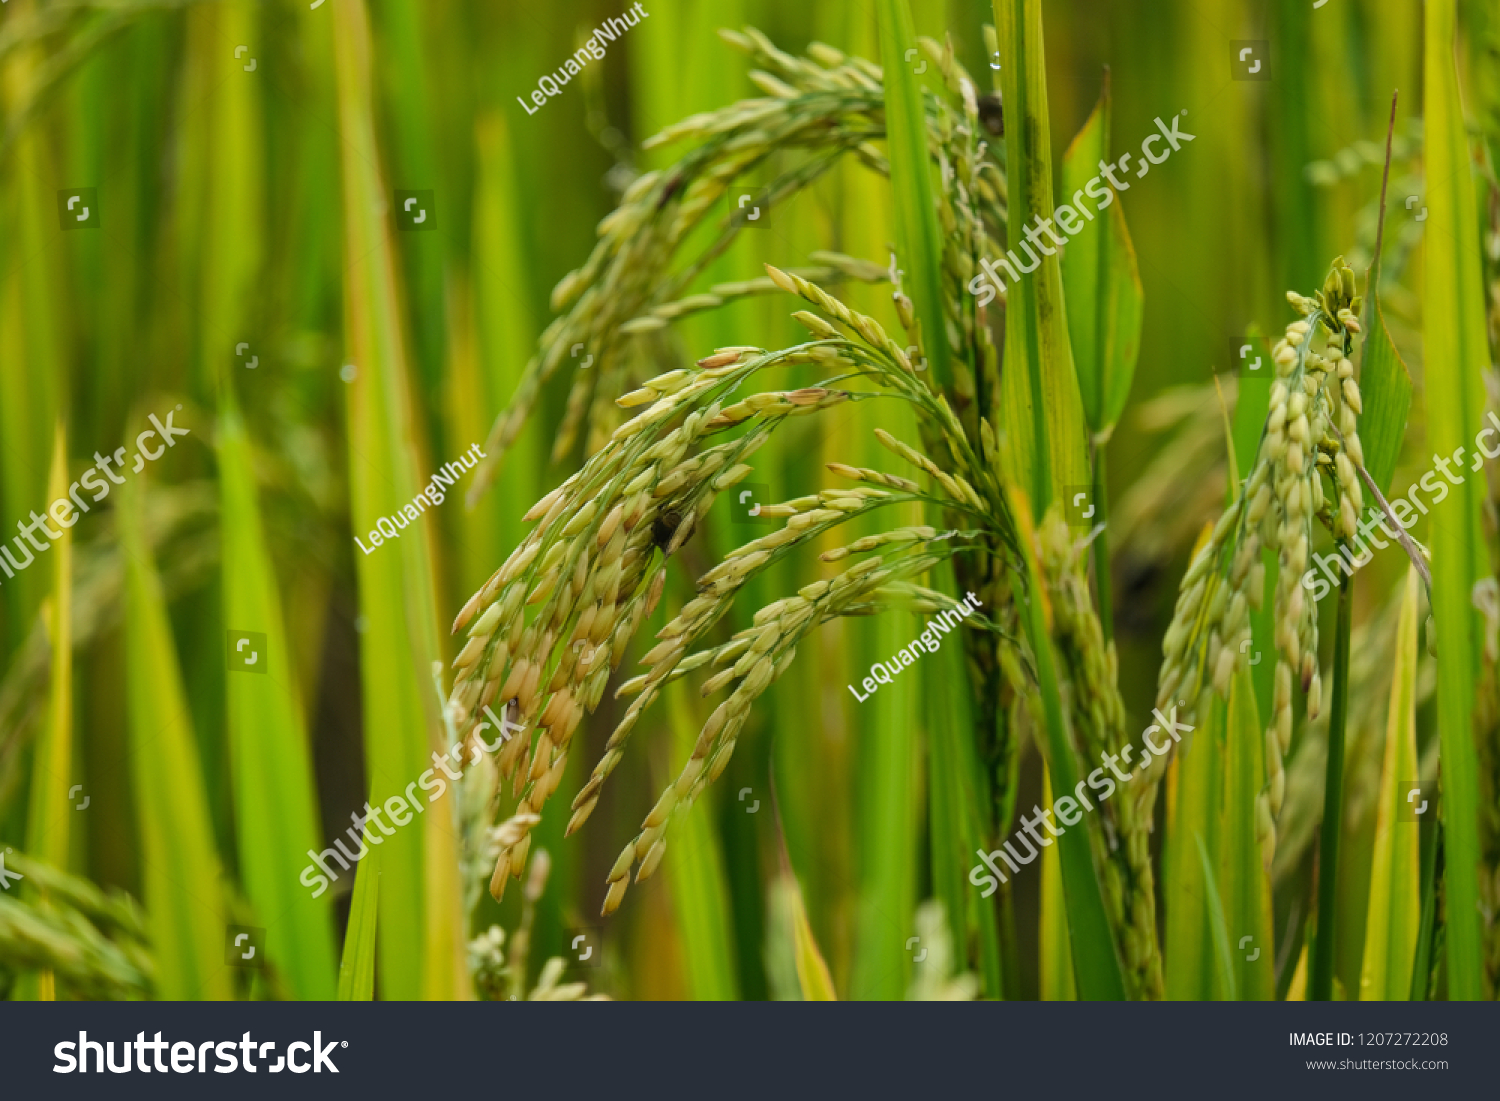 Rice field. Closeup of yellow paddy rice field with green leaf in autumn. Royalty high-quality free stock image of beautiful close up of organic rice fields or paddy field prepare the harvest #1207272208